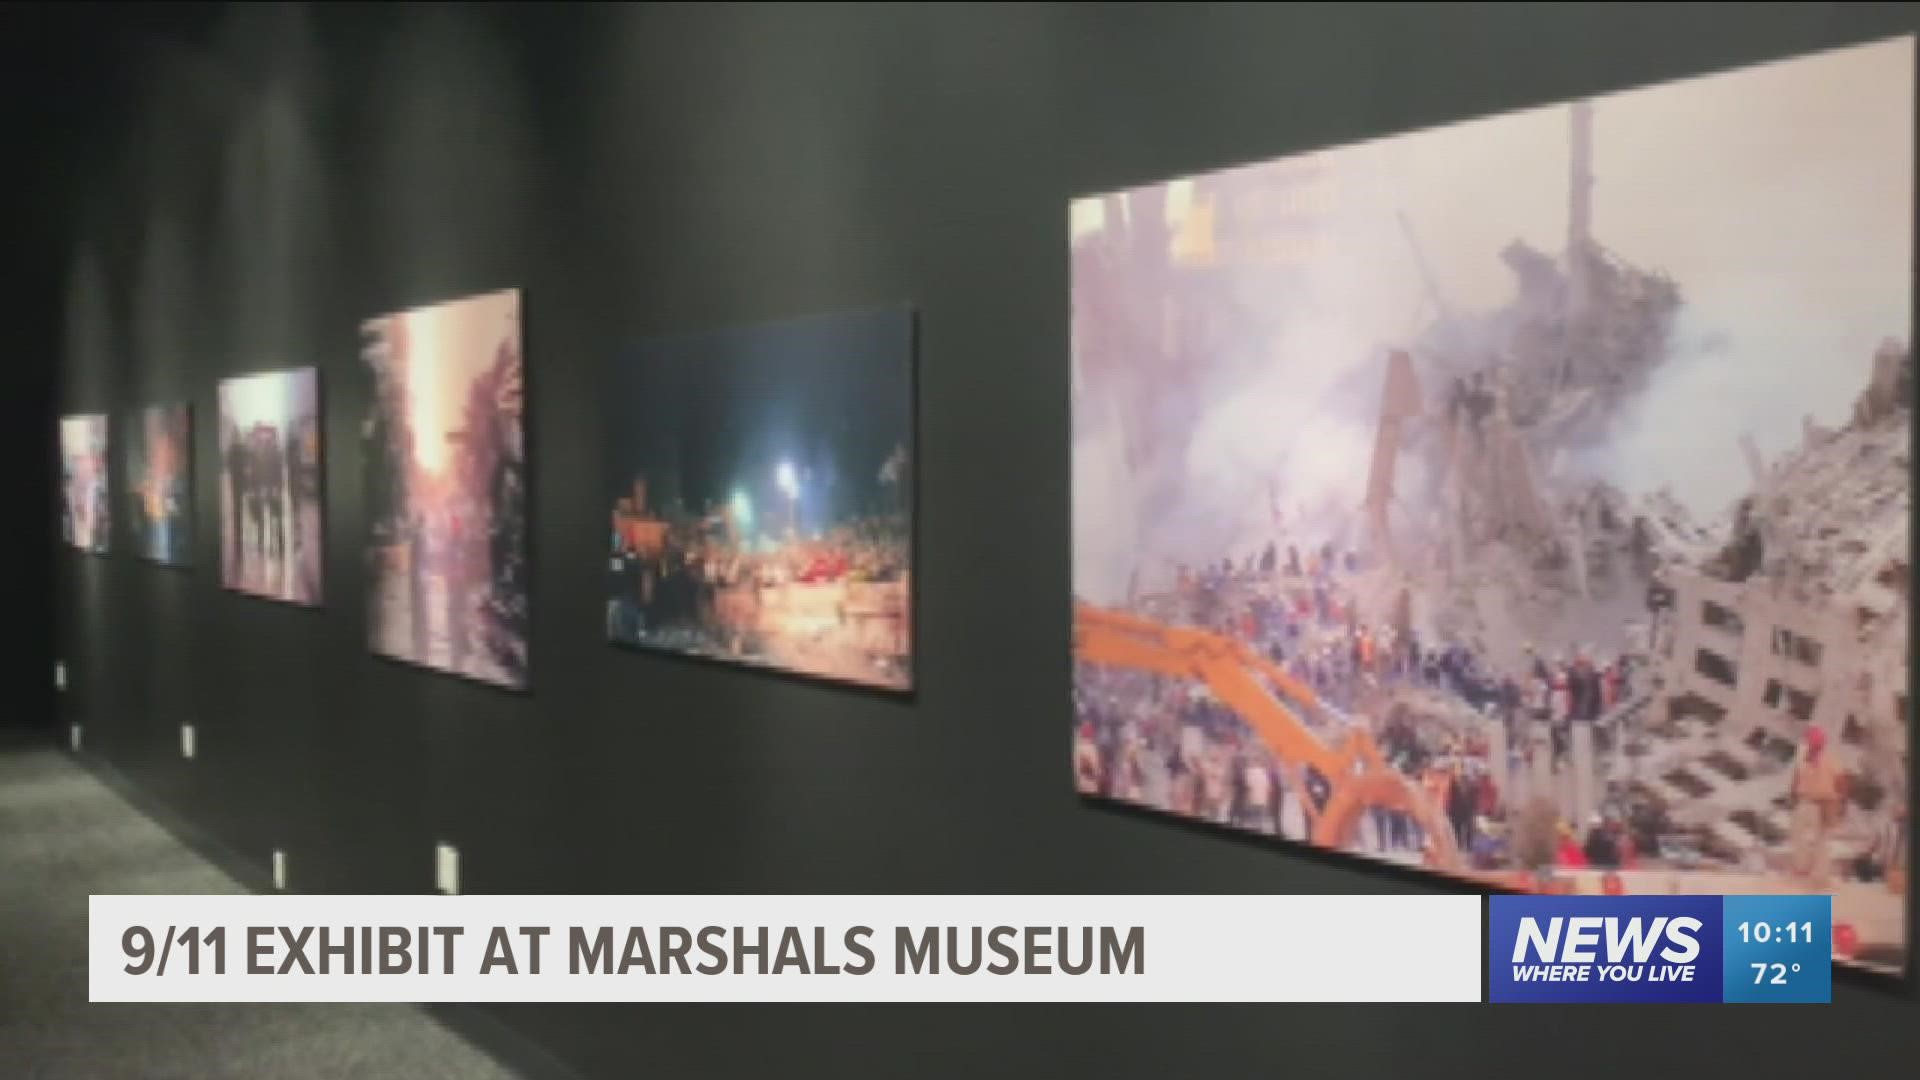 The Marshals Museum in Fort Smith is hosting a 9/11 exhibit for the entire month of September.